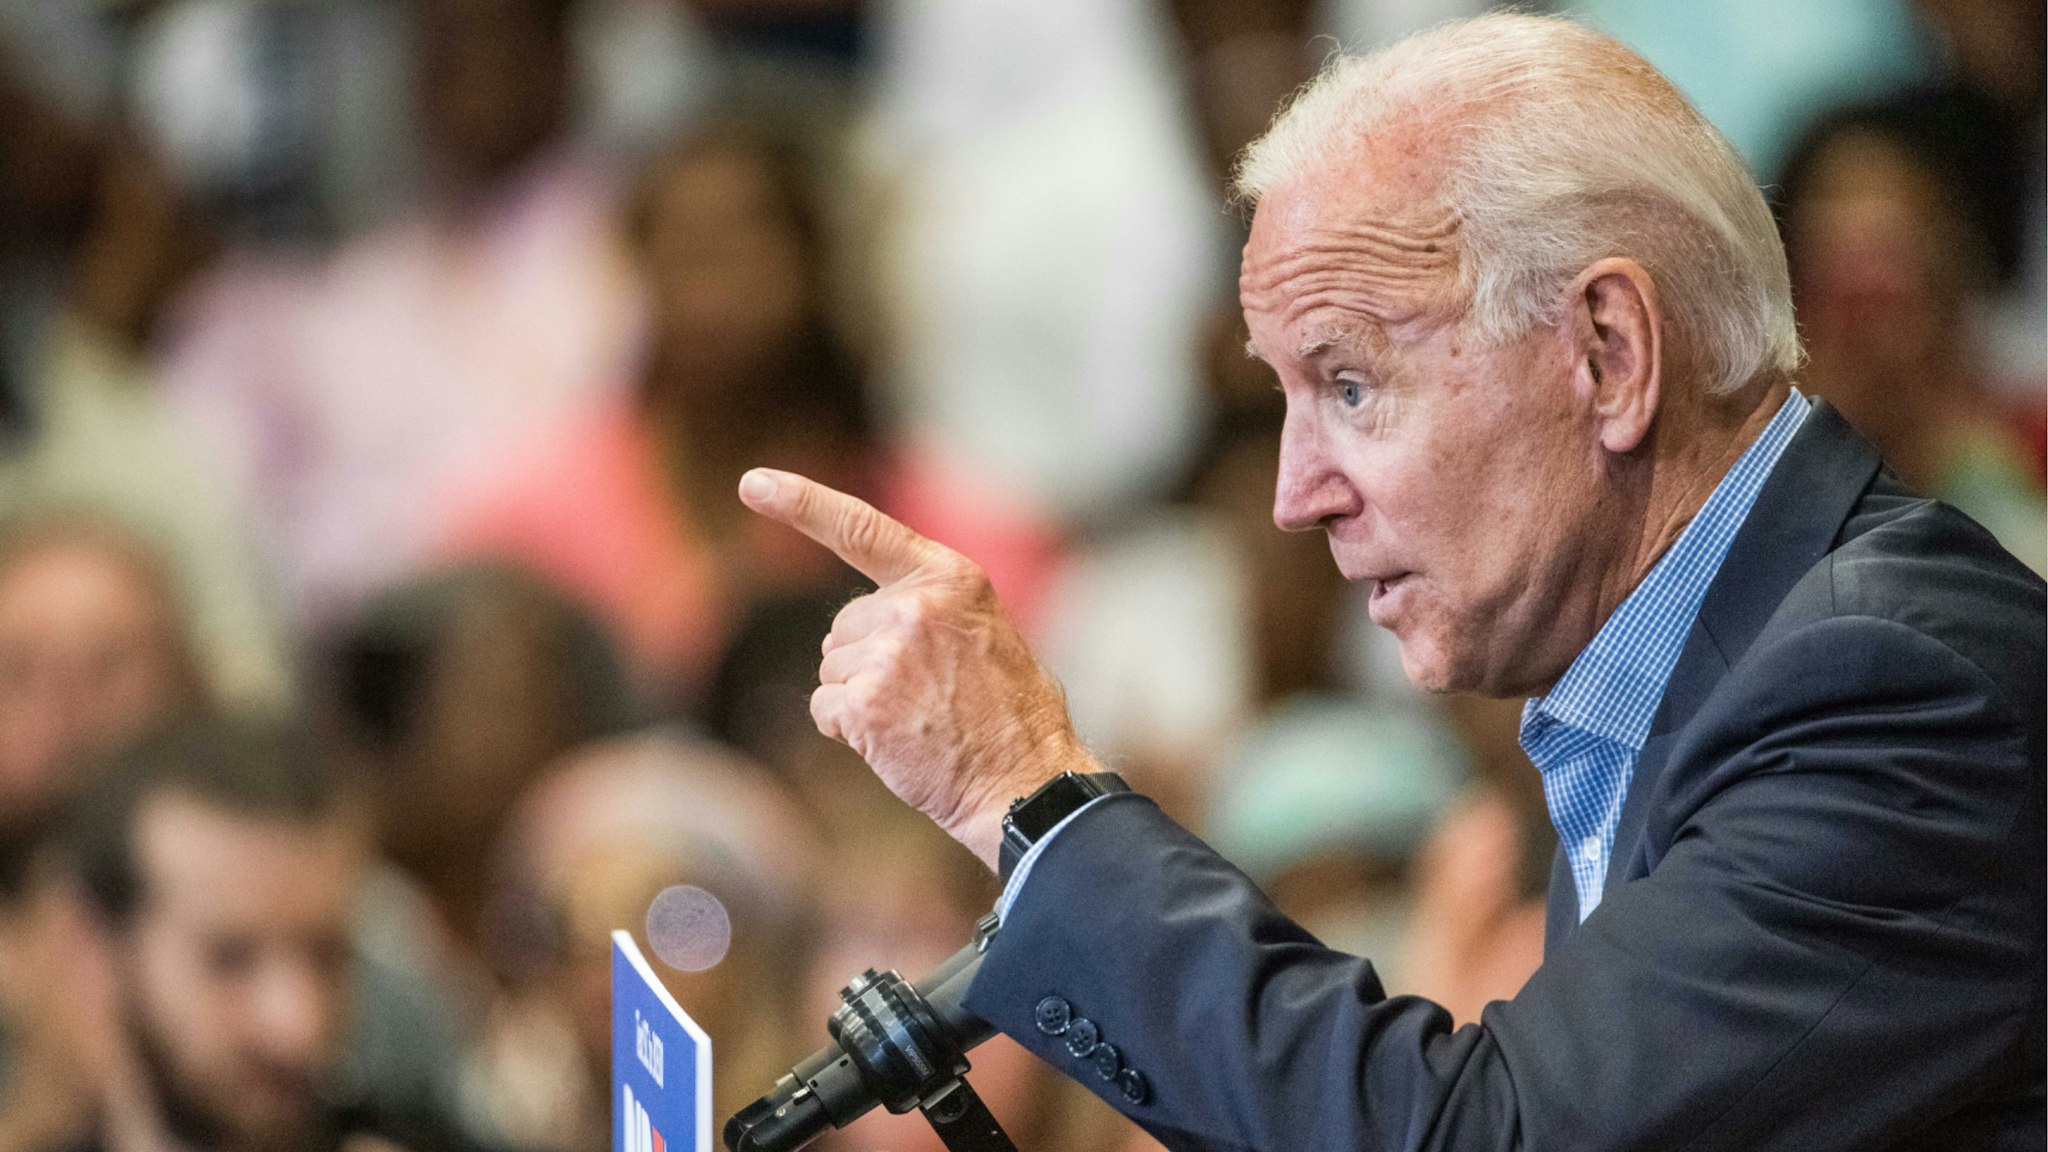 Democratic presidential candidate and former US Vice President Joe Biden addresses a crowd at a town hall event at Clinton College on August 29, 2019 in Rock Hill, South Carolina.